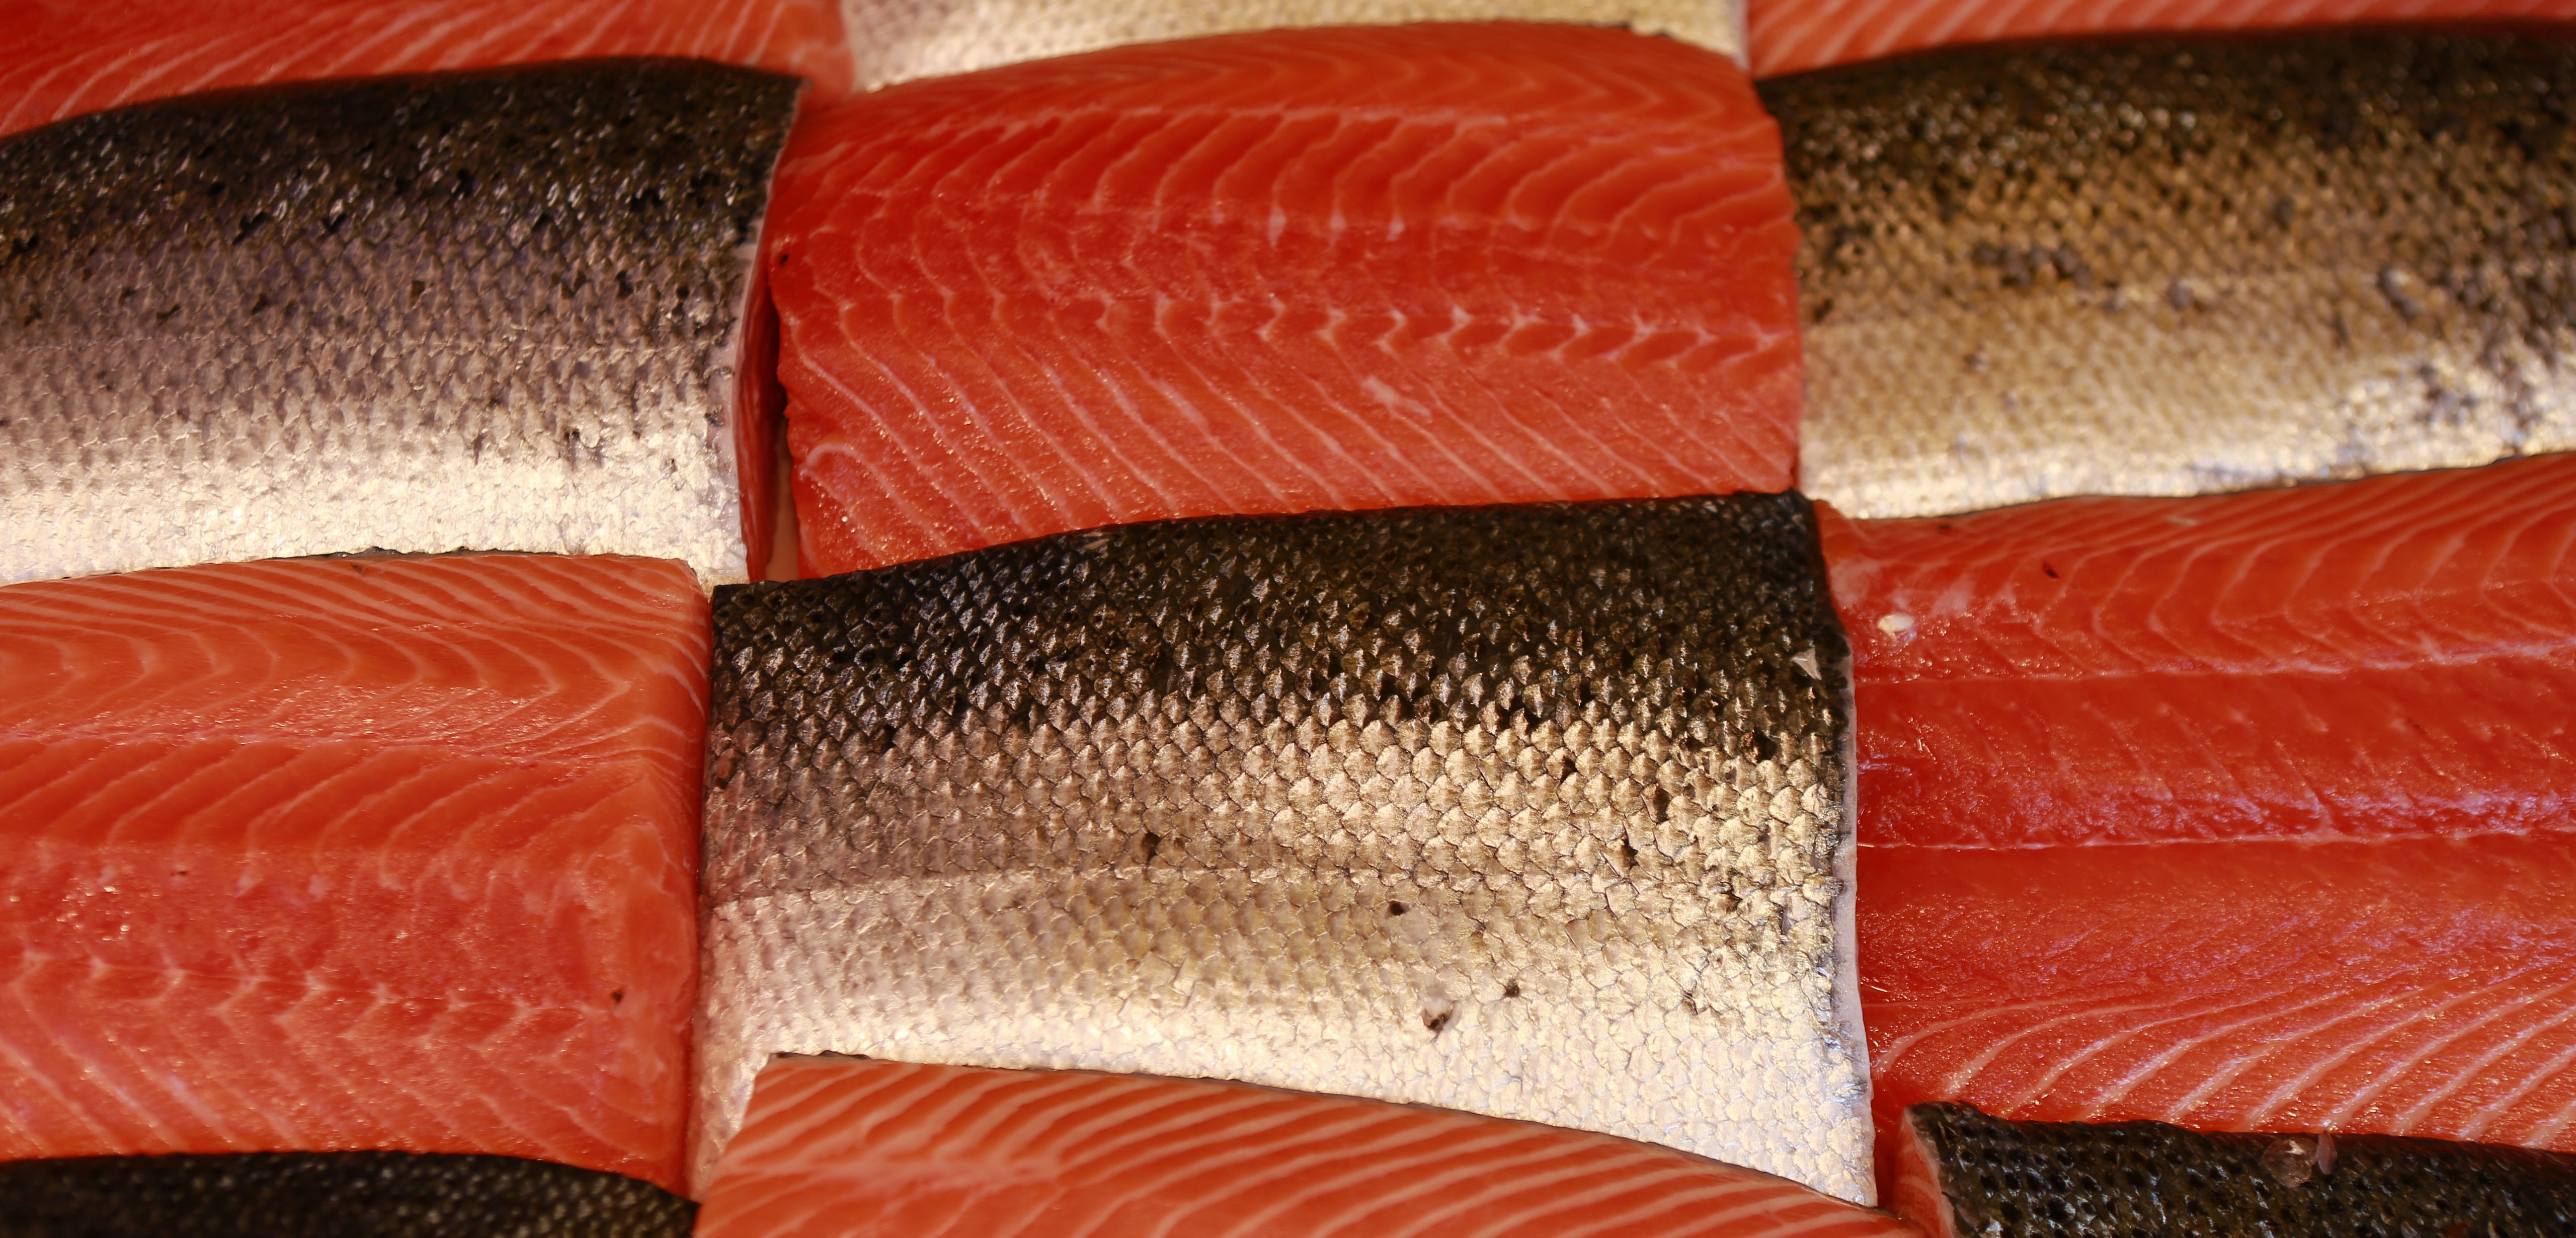 Where does your salmon come from? Photo by Owen Franken/Corbis